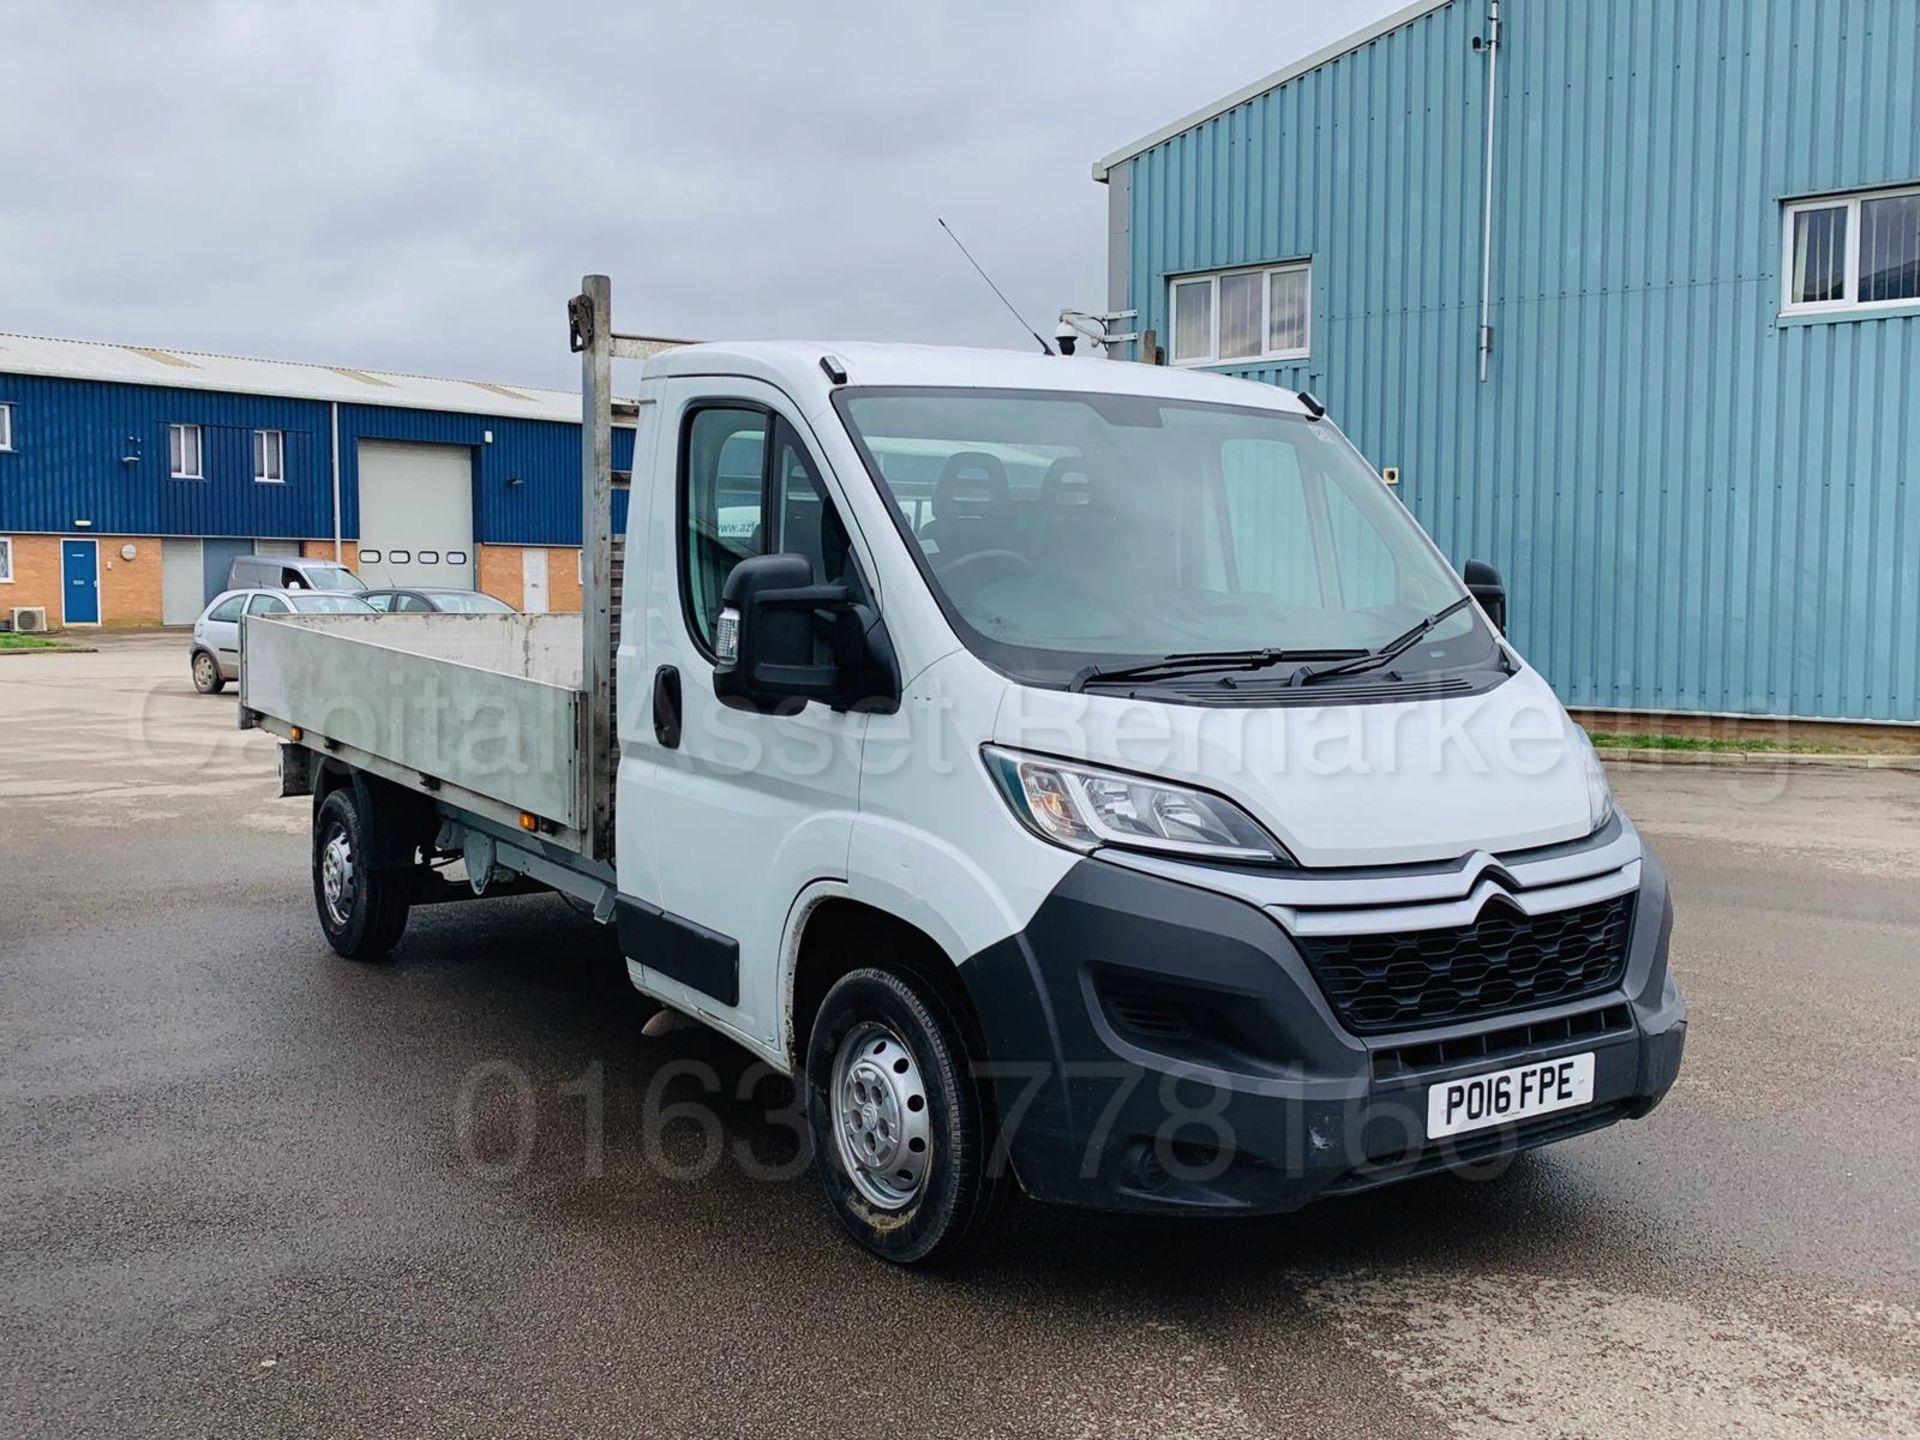 (ON SALE) CITROEN RELAY 35 *L3 - LWB 'ALLOY' DROPSIDE TRUCK* (2016) '2.2 HDI - 130 BHP' *LOW MILES* - Image 9 of 27